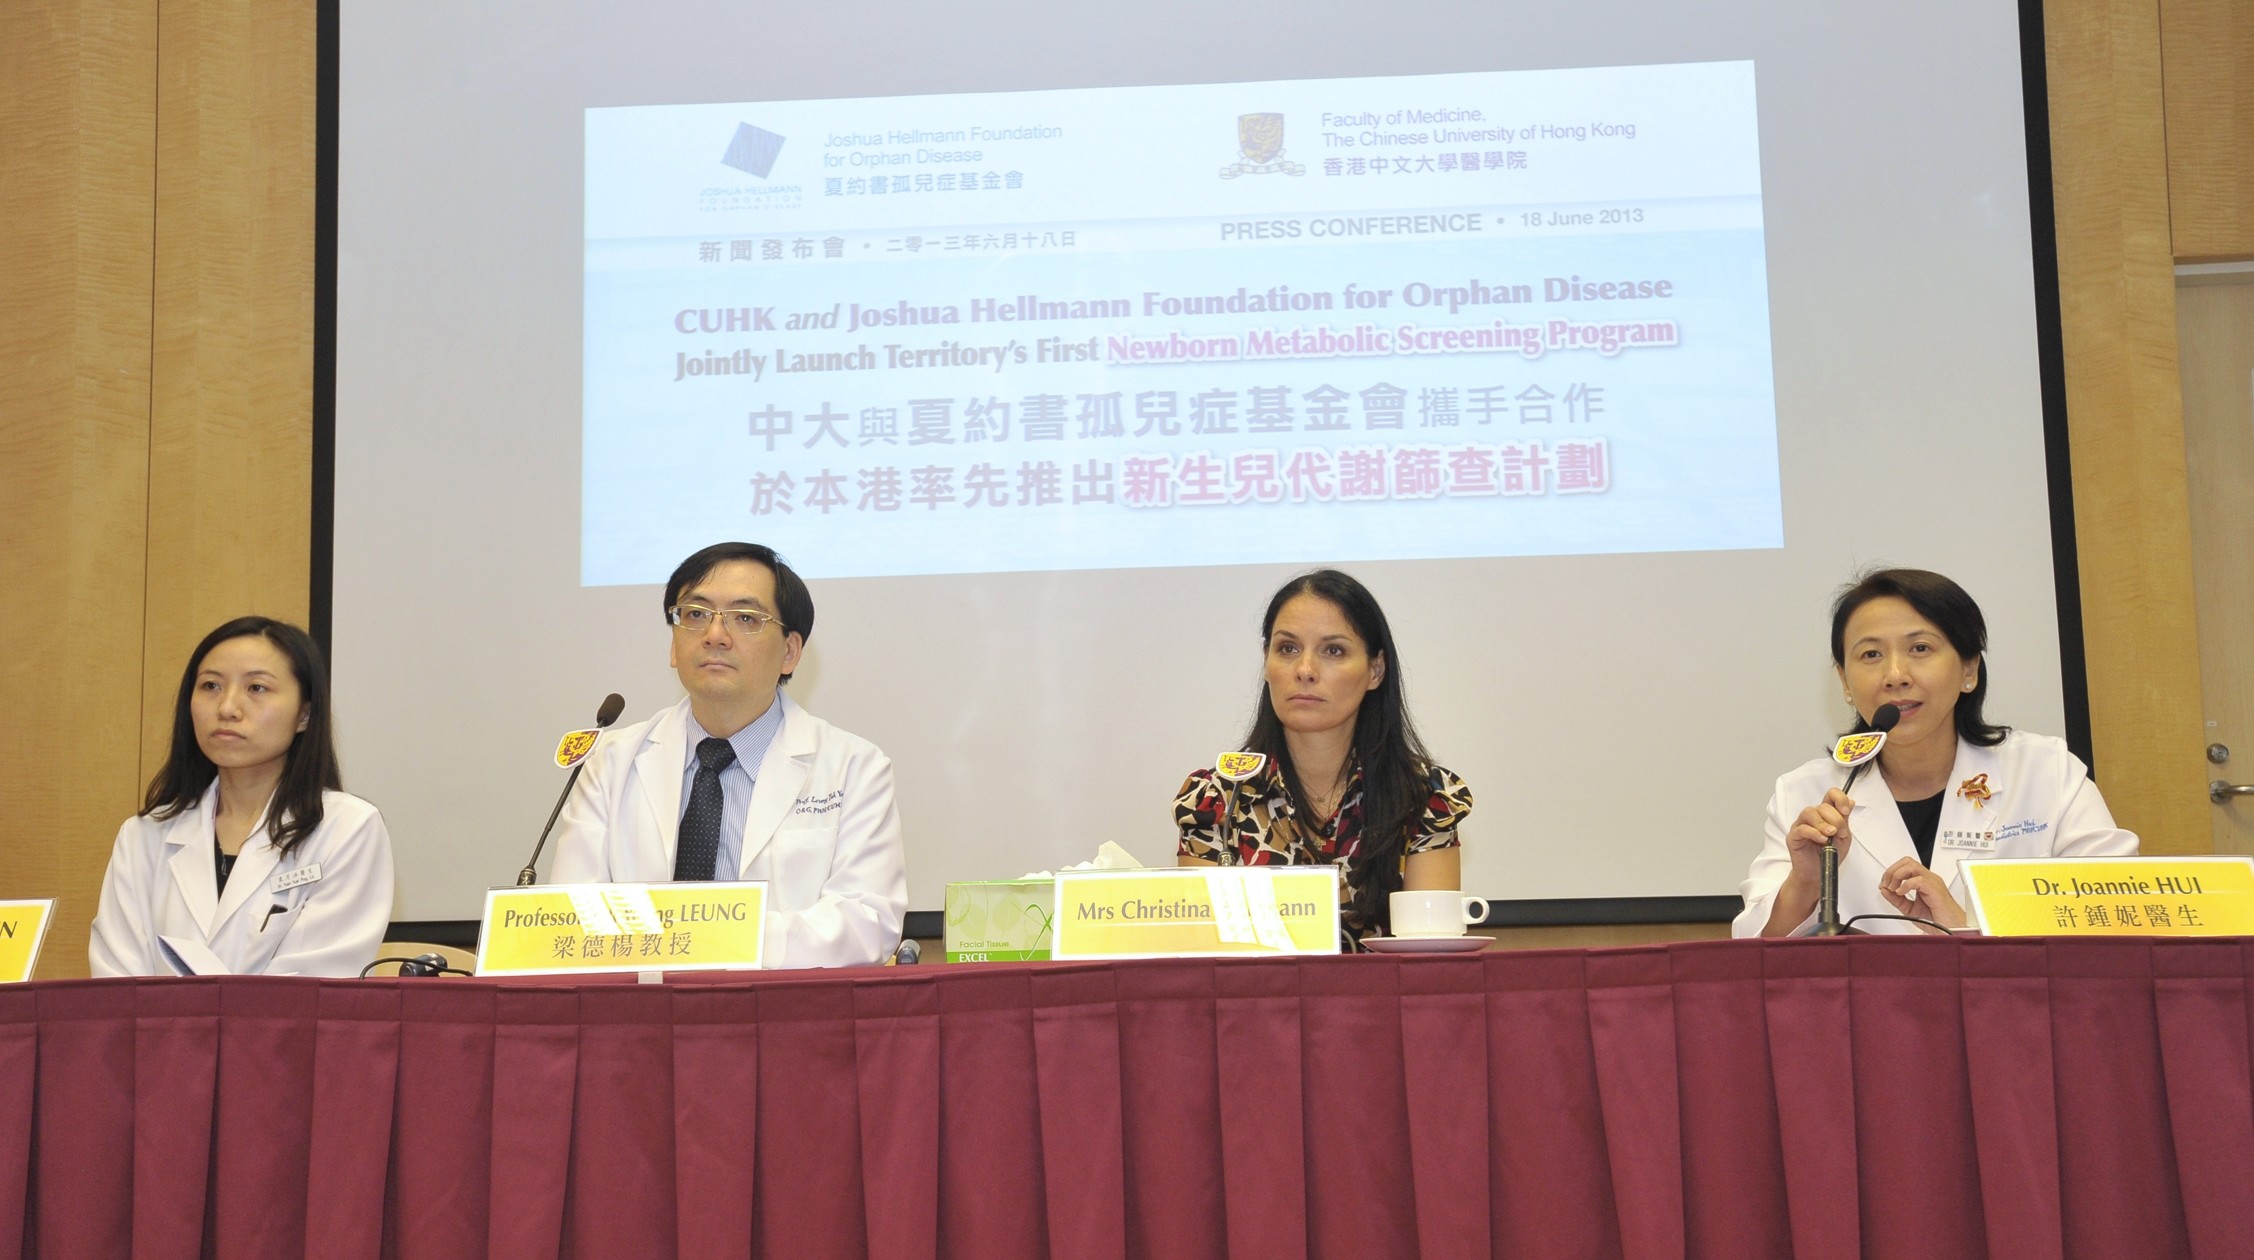 (from left) Dr. Liz Yuet Ping YUEN, Consultant, Department of Chemical Pathology, CUHK; Professor Tak Yeung LEUNG, Professor, Department of Obstetrics and Gynaecology, CUHK; Mrs. Christina Hellmann, Chairman, Joshua Hellmann Foundation for Orphan Disease and Dr. Joannie HUI, Honorary Clinical Assistant Professor, Department of Paediatrics, CUHK introduce the territory’s first screening program for inborn errors of metabolism (IEM) at CUHK